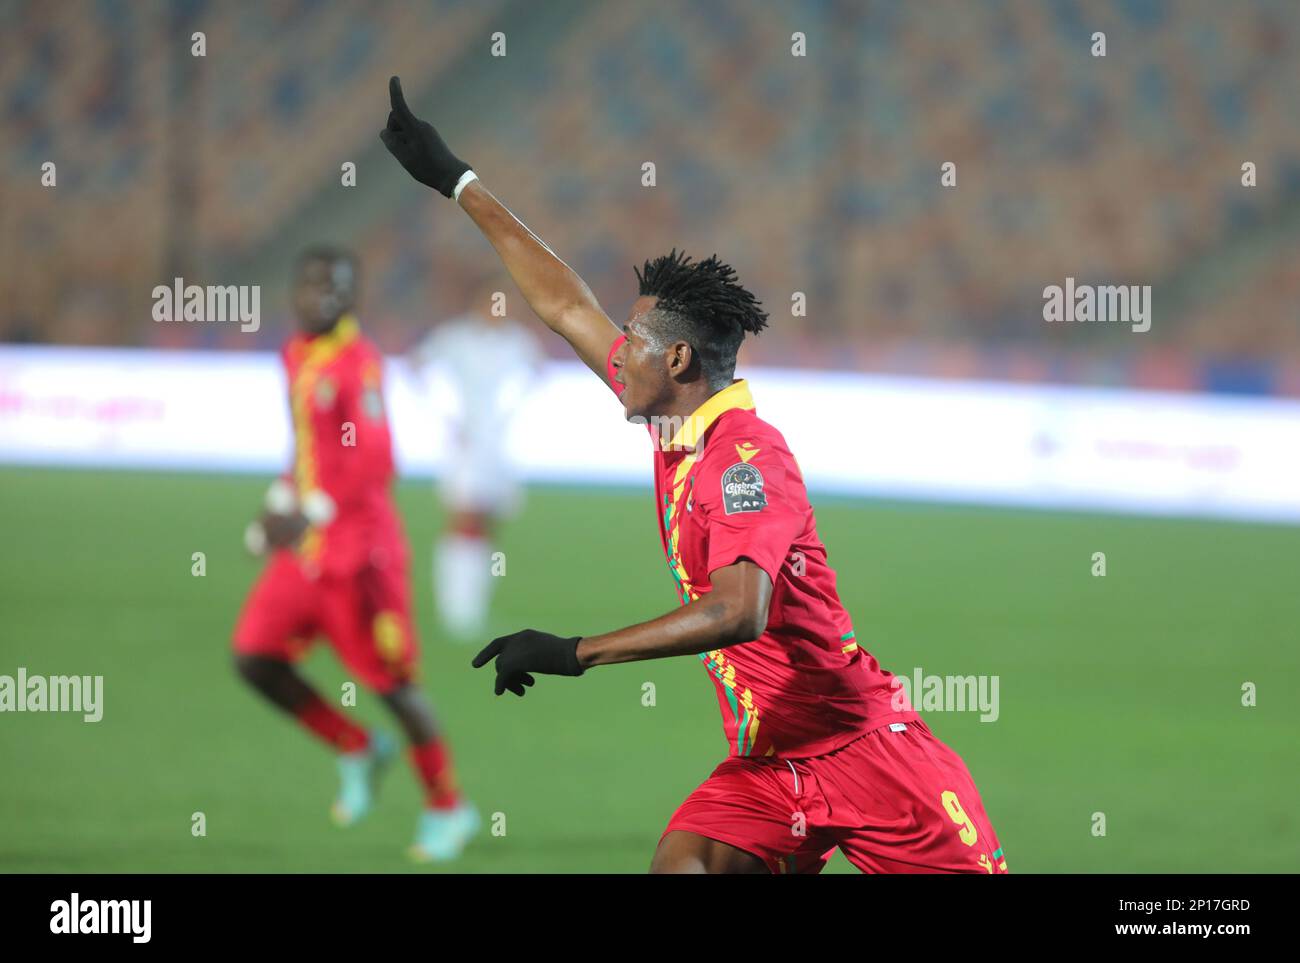 Egypt, Cairo 03 March 2023 - Deo Bassinga of Congo celebrates after scoring opening goal during the Quarter Final match between Congo Under 20 and Tunisia Under 20 of TotalEnergies Under 20 Africa Cup of Nations Egypt 2023 and qualify play off for FIFA under 20 World Cup 2023 in Indonesia. Cairo International Stadium in Cairo, Egypt, 2023. Photo SFSI Credit: Sebo47/Alamy Live News Stock Photo